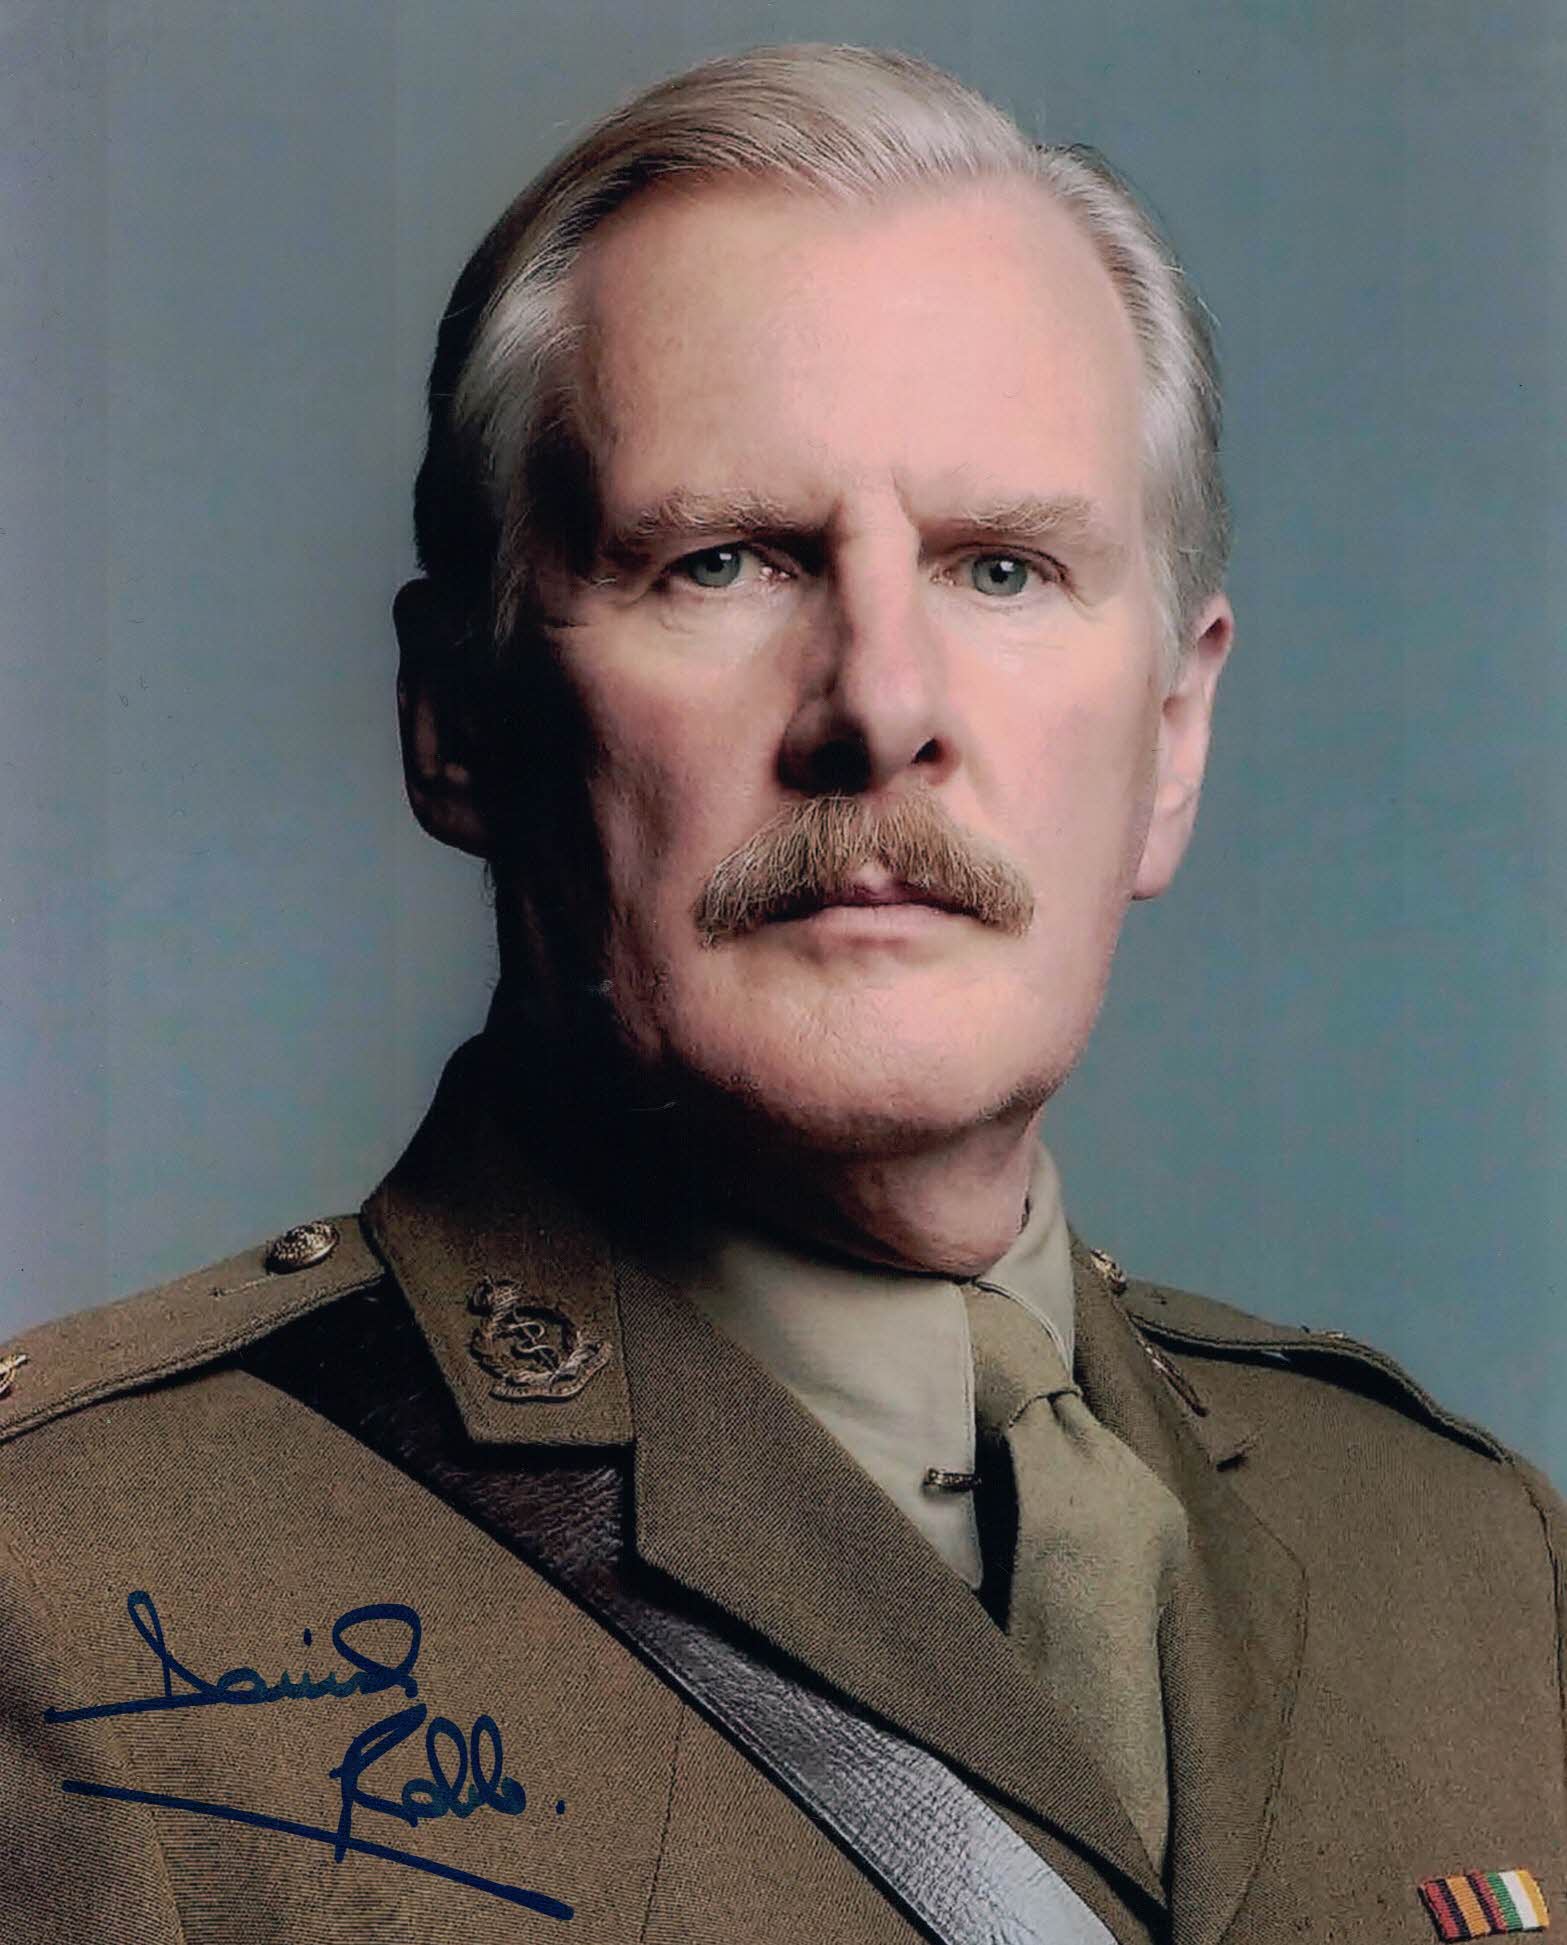 DAVID ROBB - Dr Clarkson in Downton Abbey - hand signed 10 x 8 photo